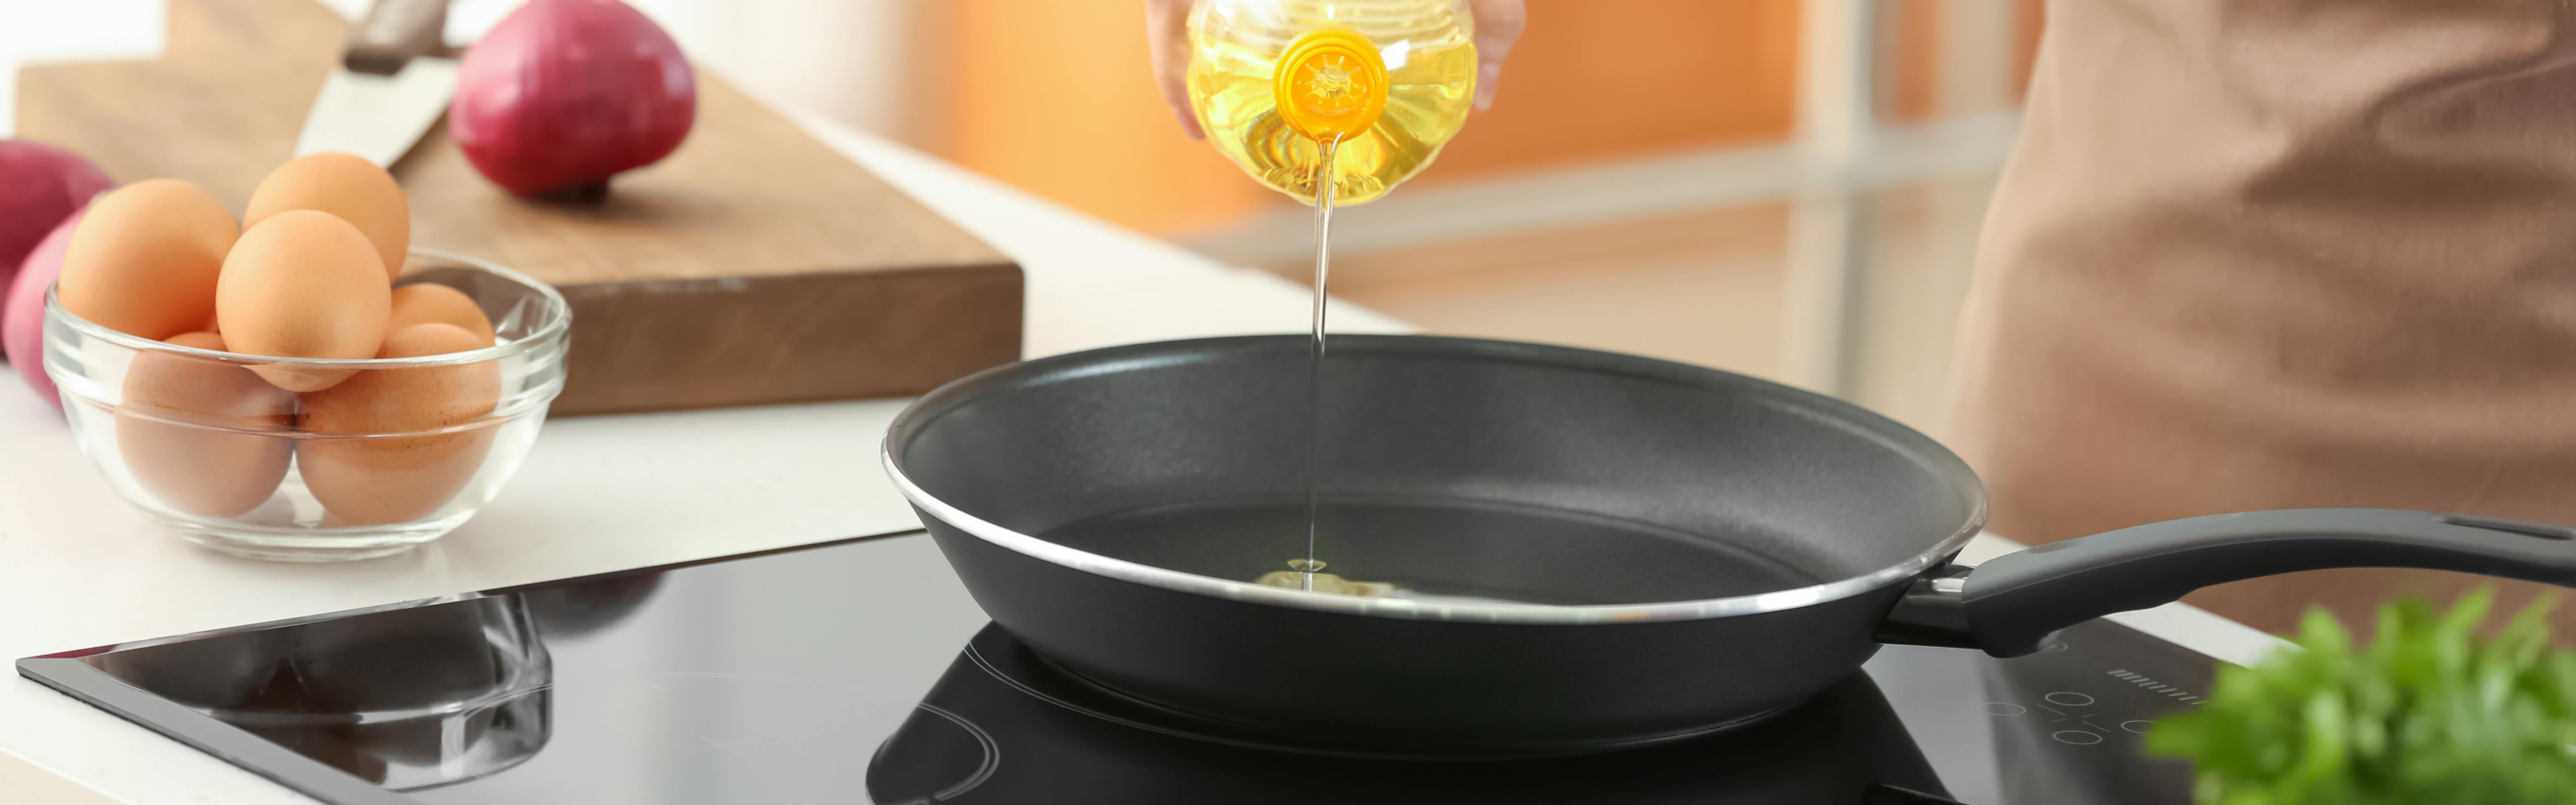 A hand pouring oil from a bottle into a pan on an induction stove. There is a bowl of eggs sitting next to the stove. 